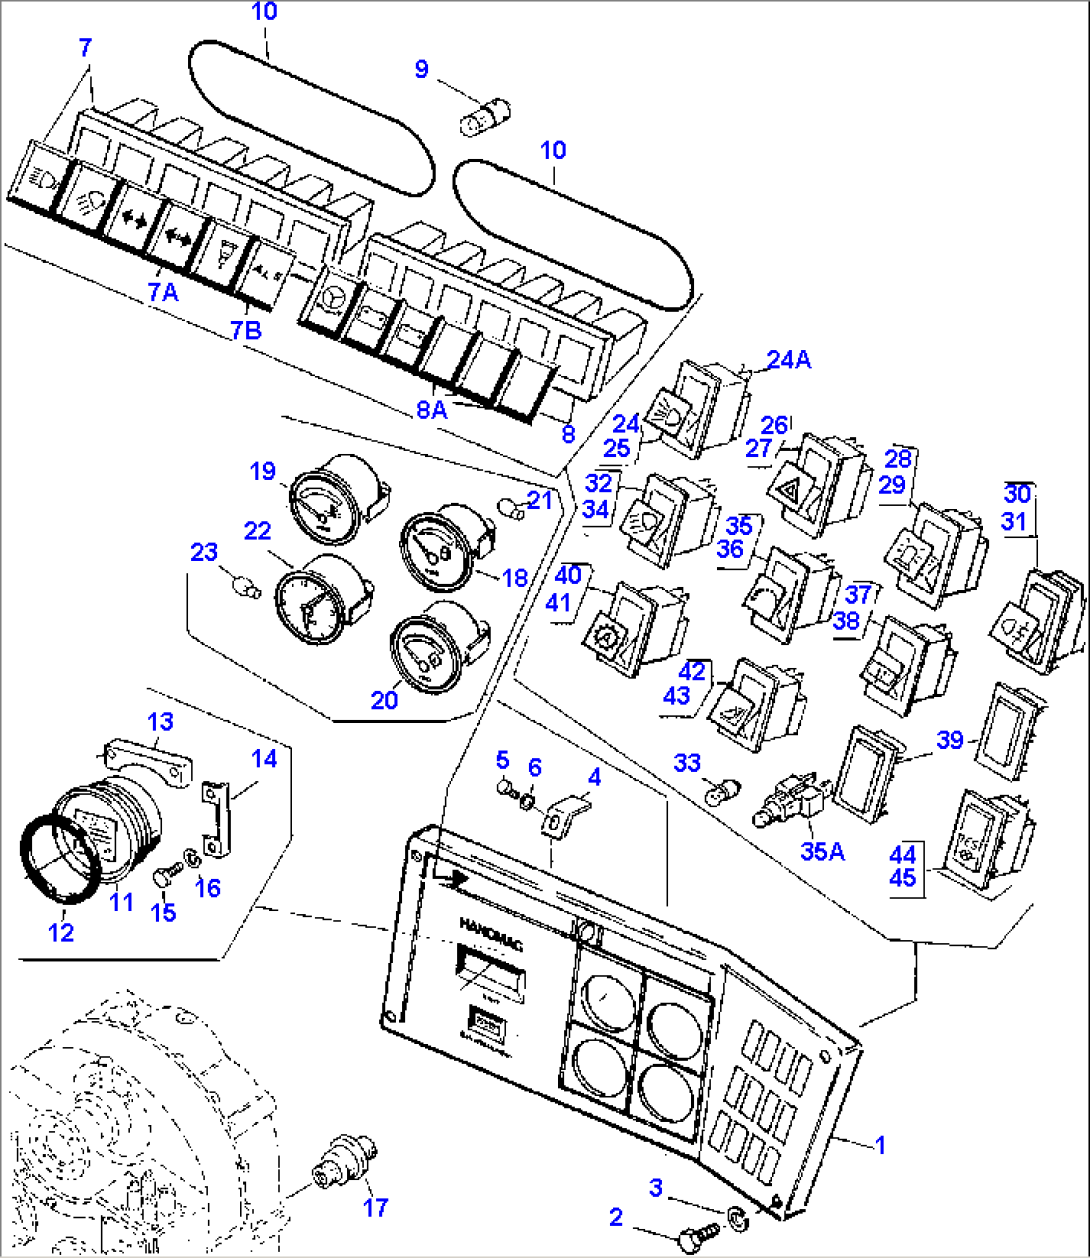 INSTRUMENT PANEL AND INSTRUMENTS